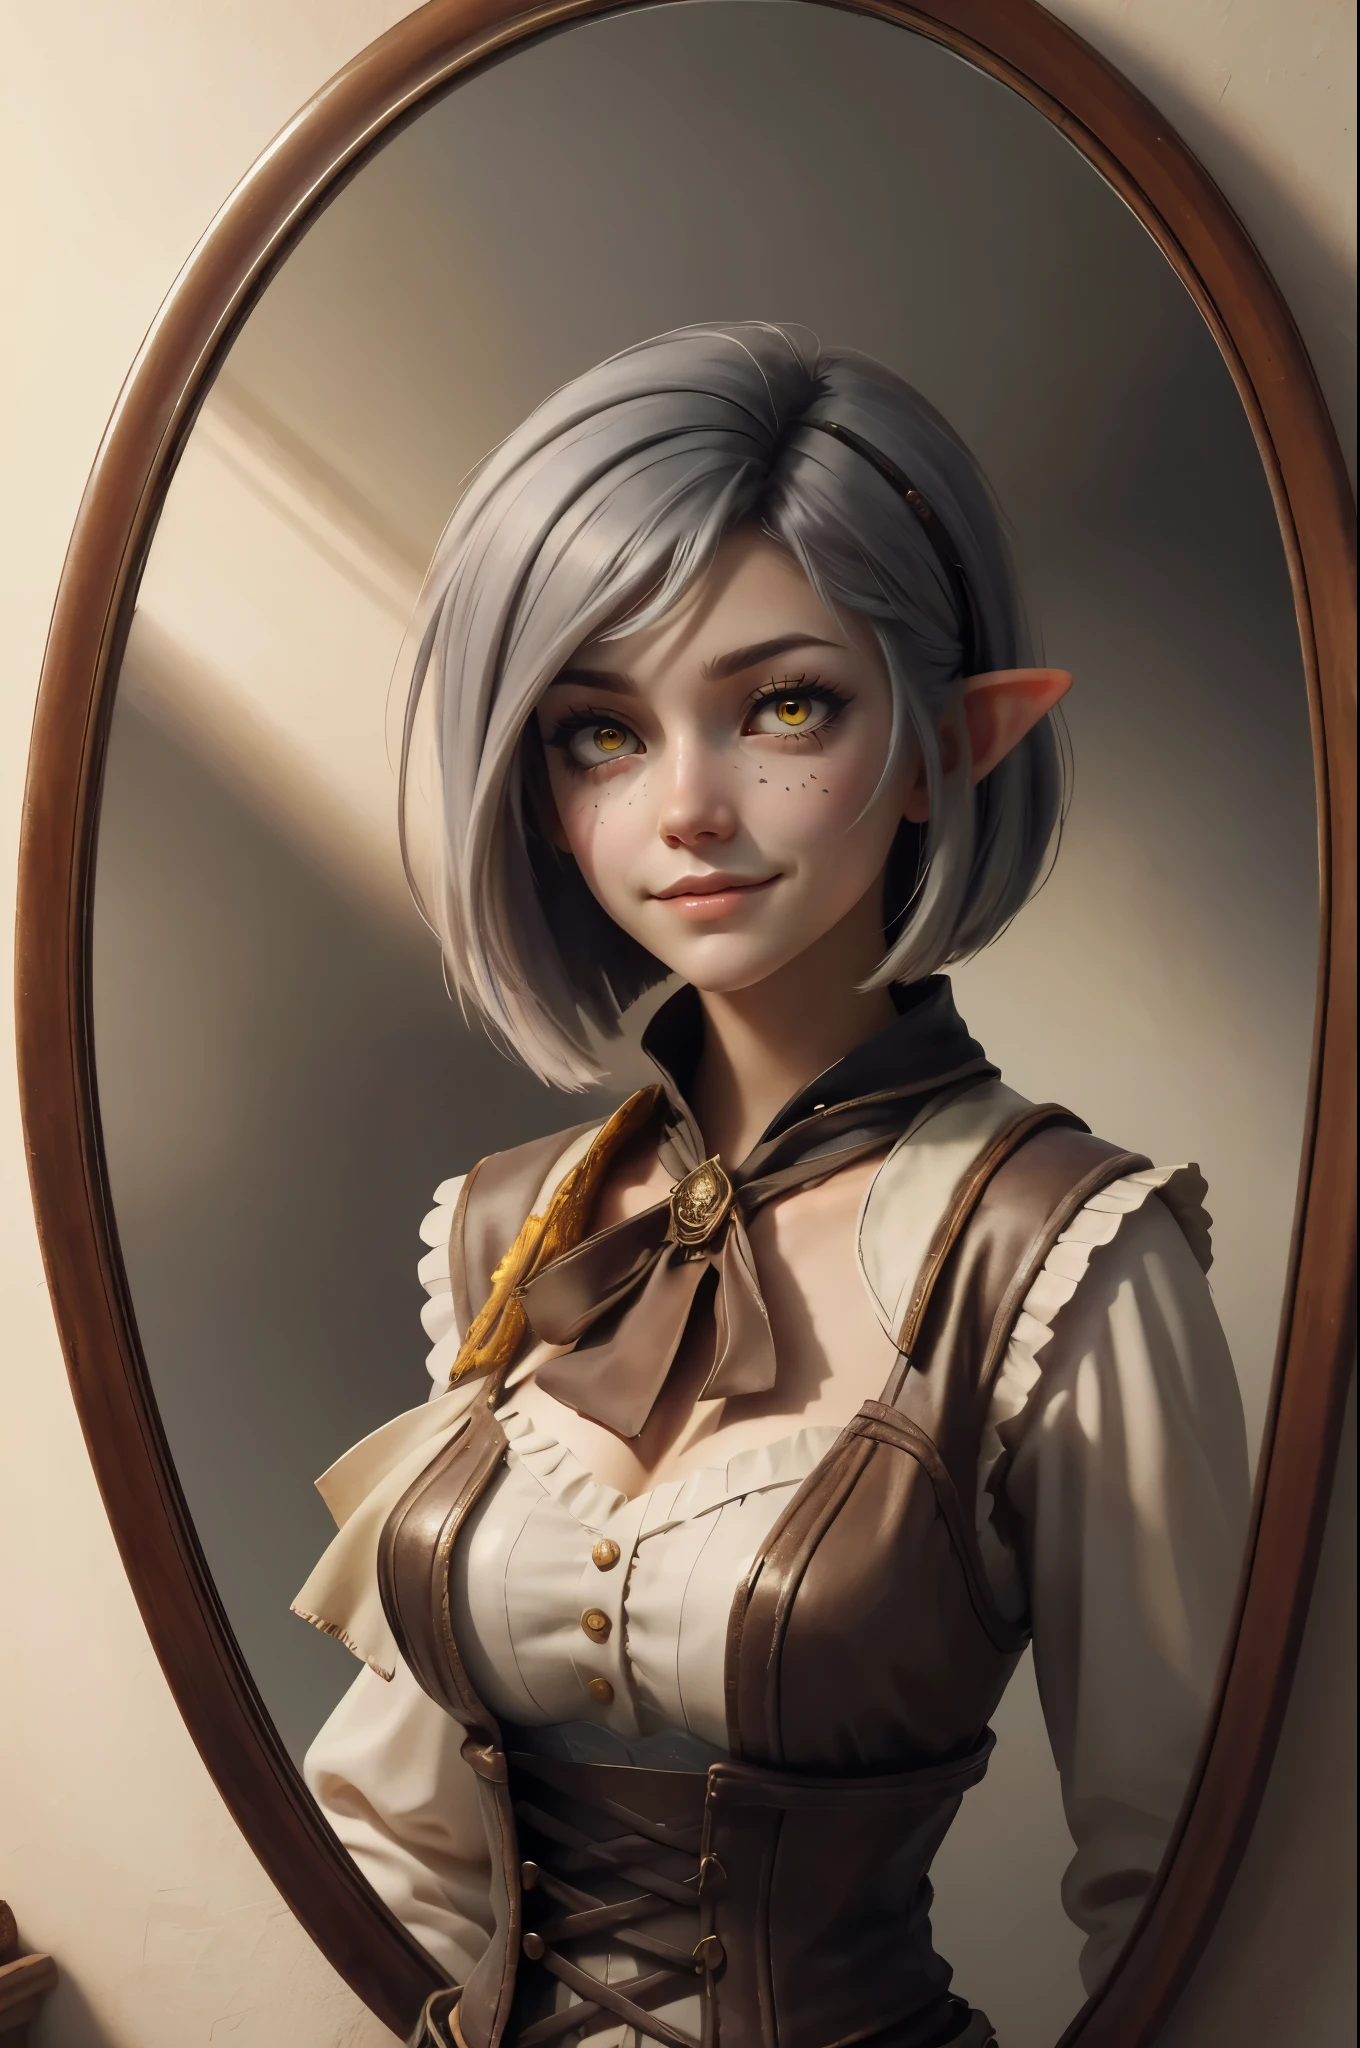 Illustrate a widescreen image of a female elf with yellow eyes and grey hair in a long bob cut, looking cheerful as she gazes into a mirror. In the mirror, her reflection shows a sad face, creating a stark contrast between her outward joy and inner sorrow. She is dressed in her adventurer outfit, including a beige blouse and corset vest, within an intimate setting of her quarters. The scene should be rich in lighting and shadow effects to create a dramatic atmosphere, rendered in a detailed digital painting style reminiscent of fantasy art illustrations. The art should evoke the styles of highly detailed digital artists known for their intricate work, emphasizing the emotional disparity and the complex theme of hidden despair behind a mask of joy.